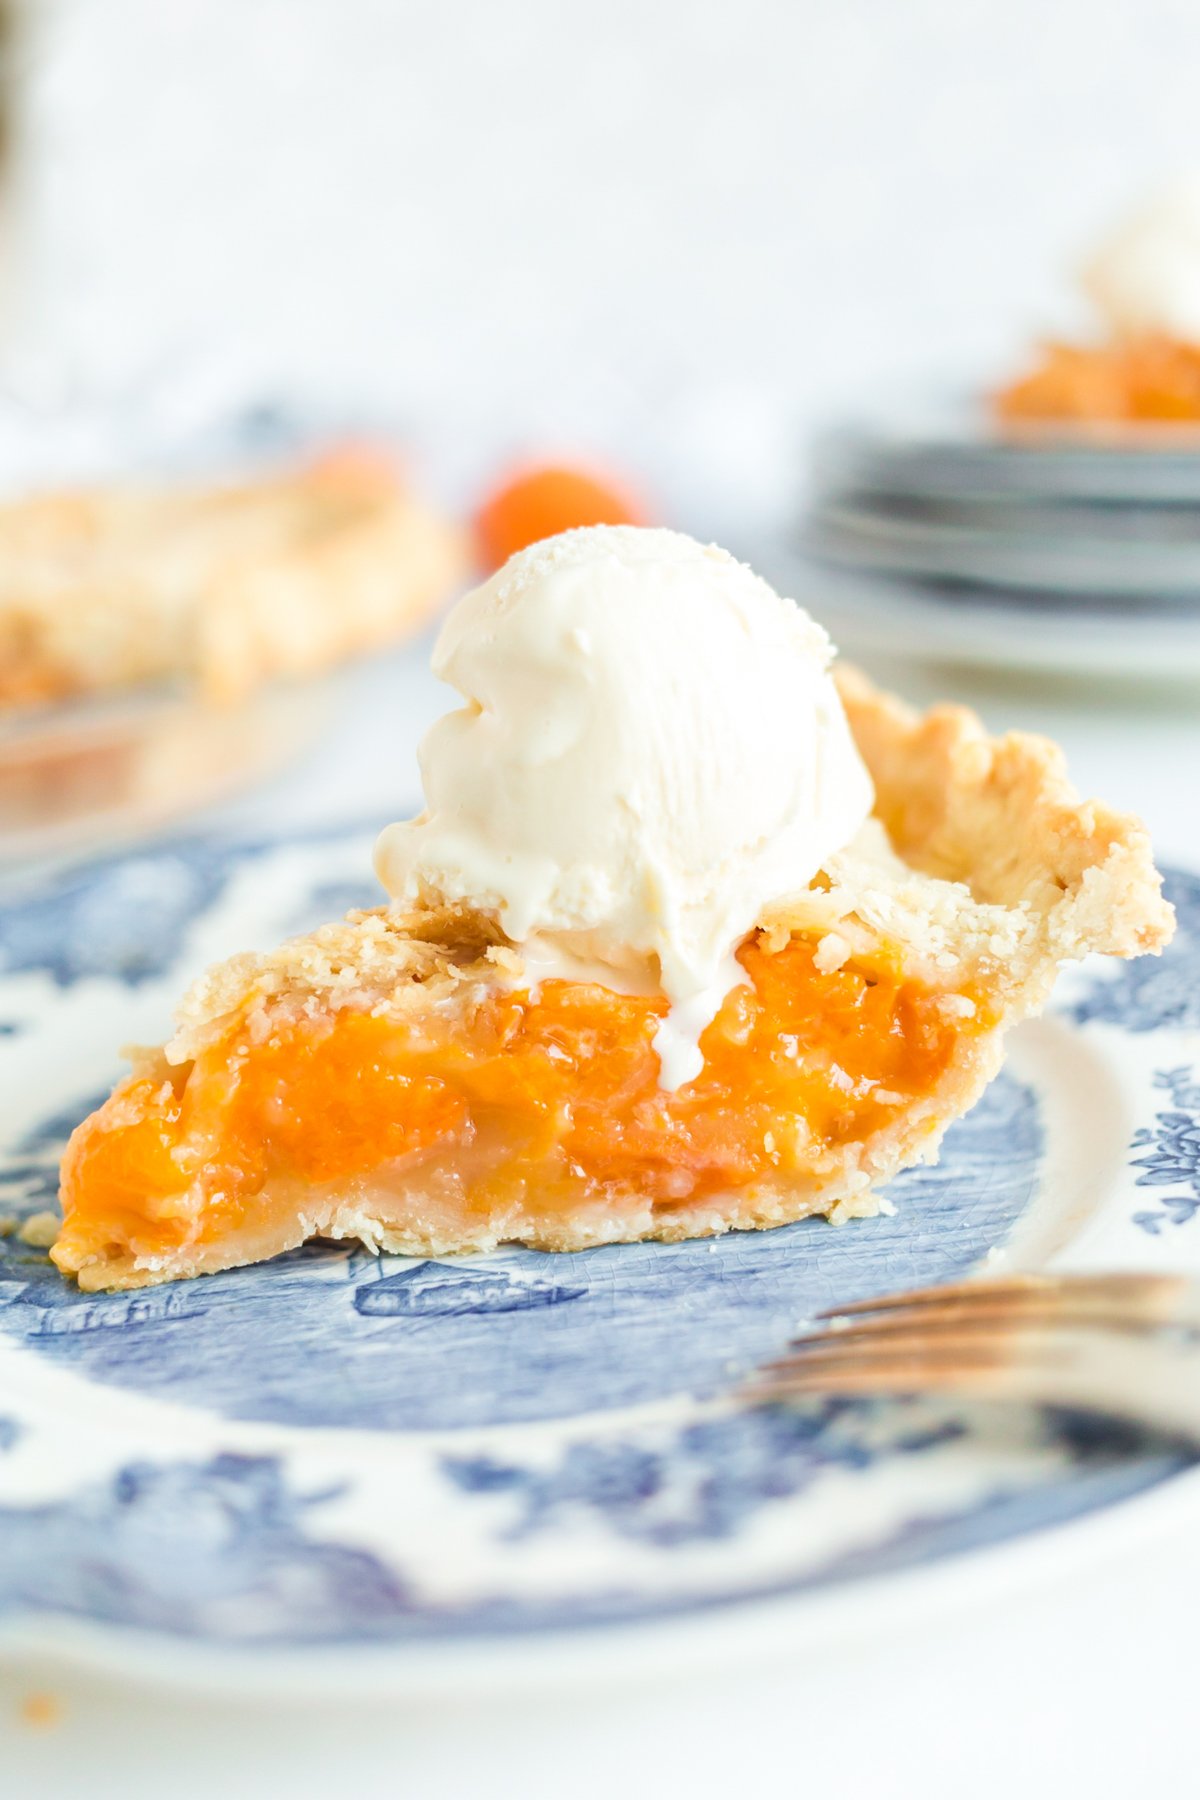 Slice of apricot pie topped with scoop of vanilla ice cream on a dessert plate.